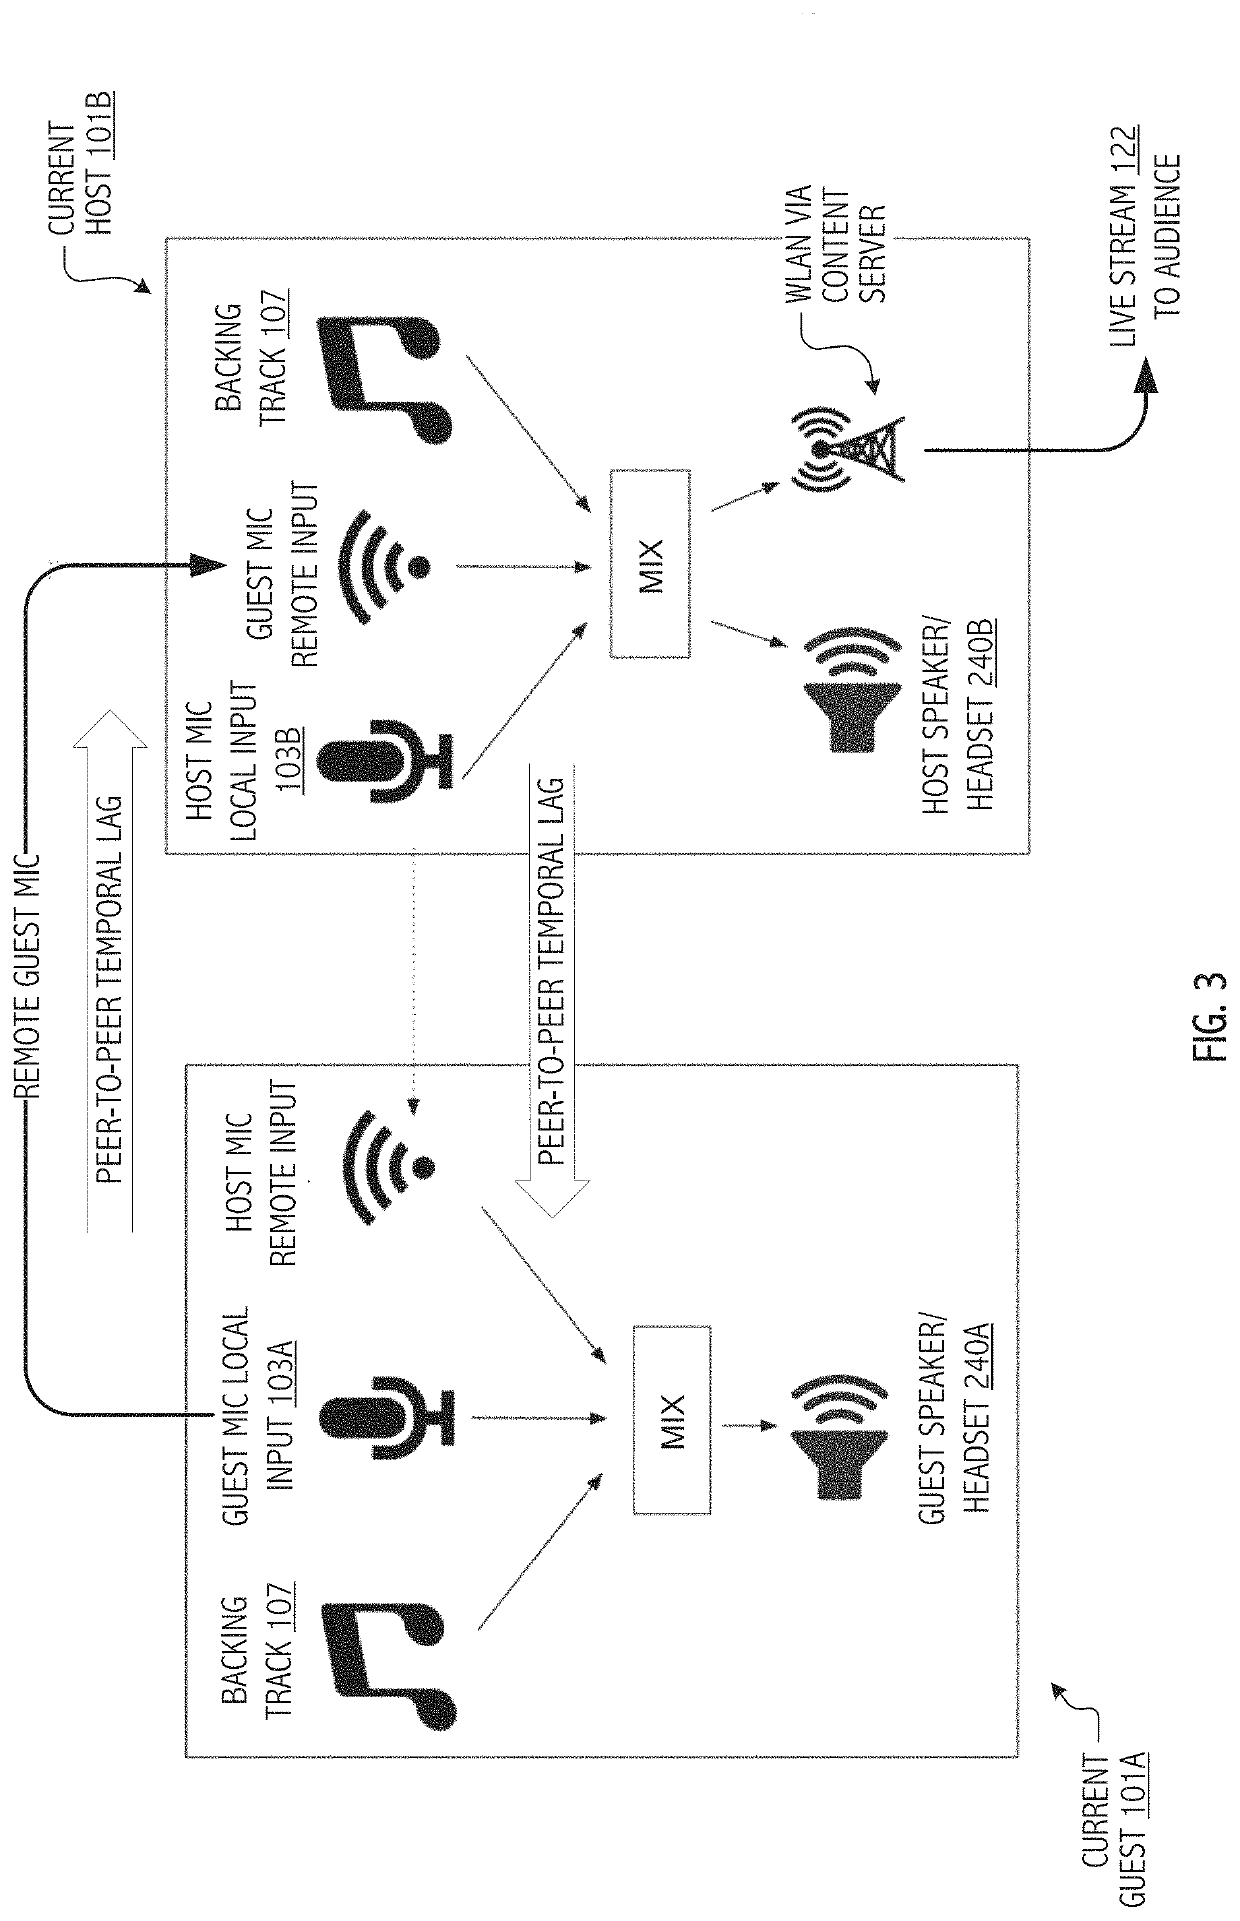 Audiovisual collaboration system and method with latency management for wide-area broadcast and social media-type user interface mechanics